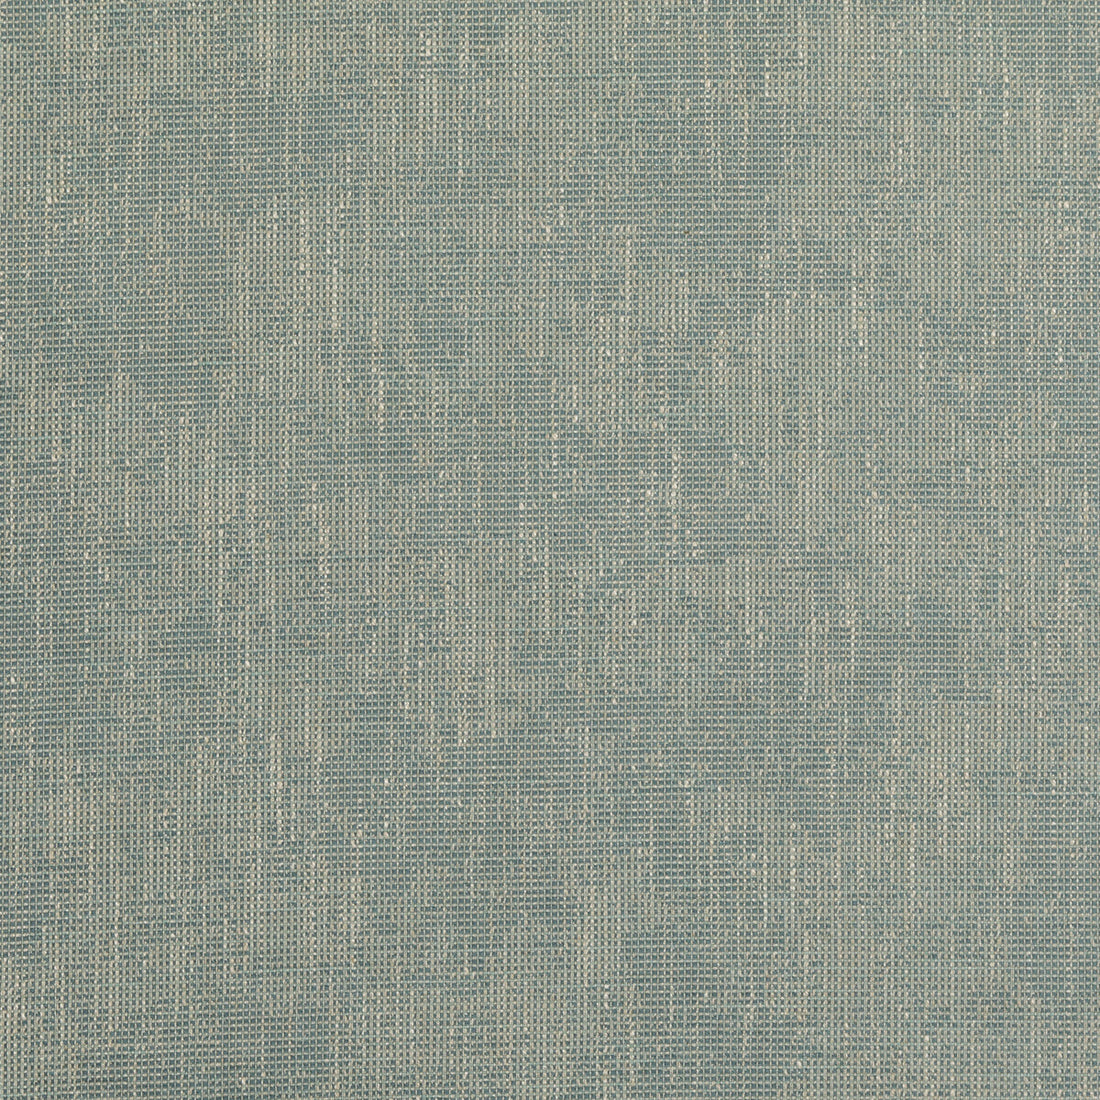 Bower fabric in soft blue color - pattern PF50489.605.0 - by Baker Lifestyle in the Block Weaves collection